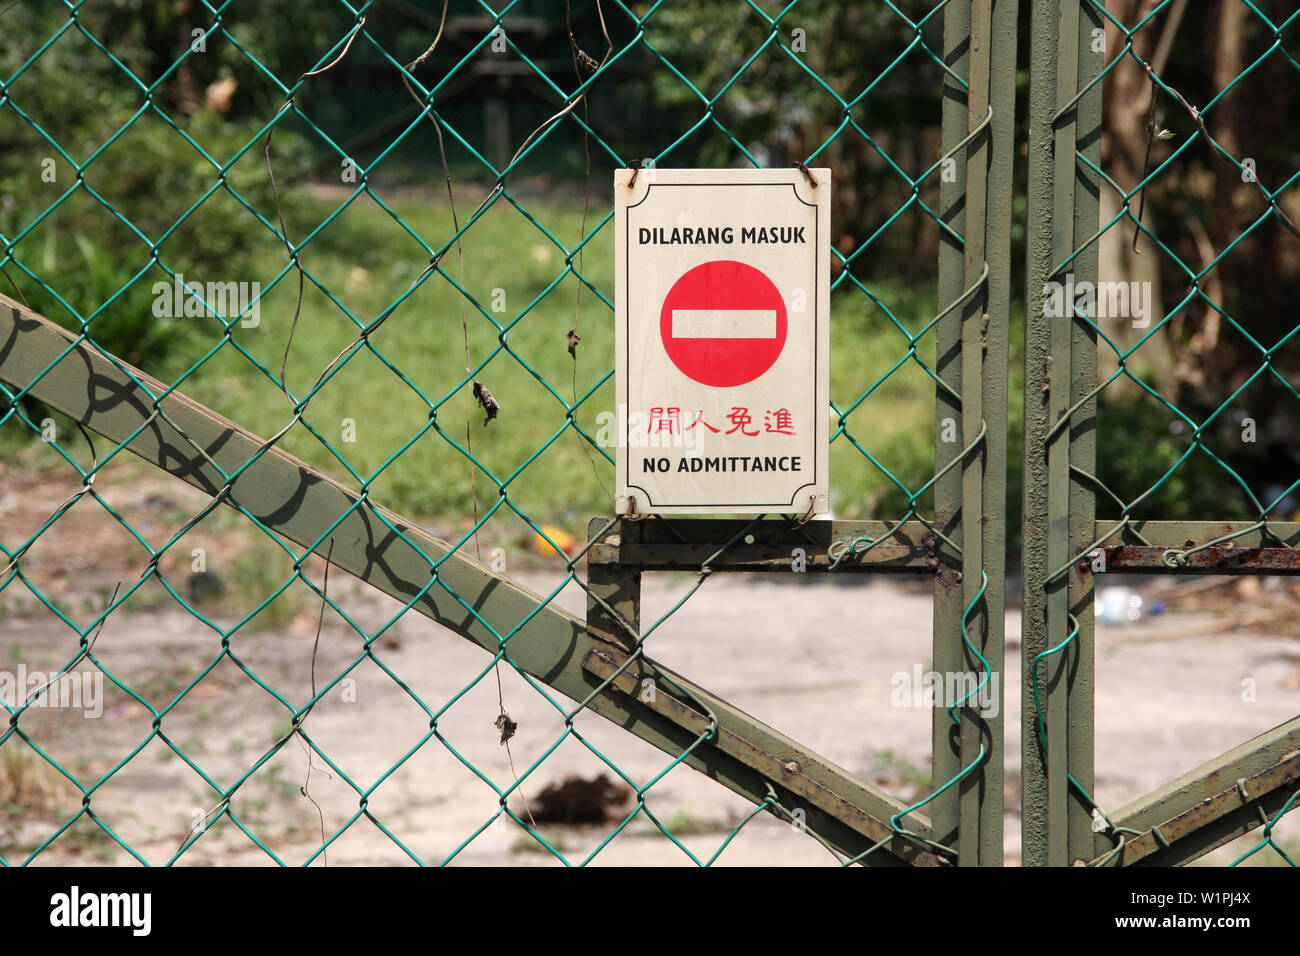 Sign in Malaysian language - no admittance, trespassing forbidden Stock Photo